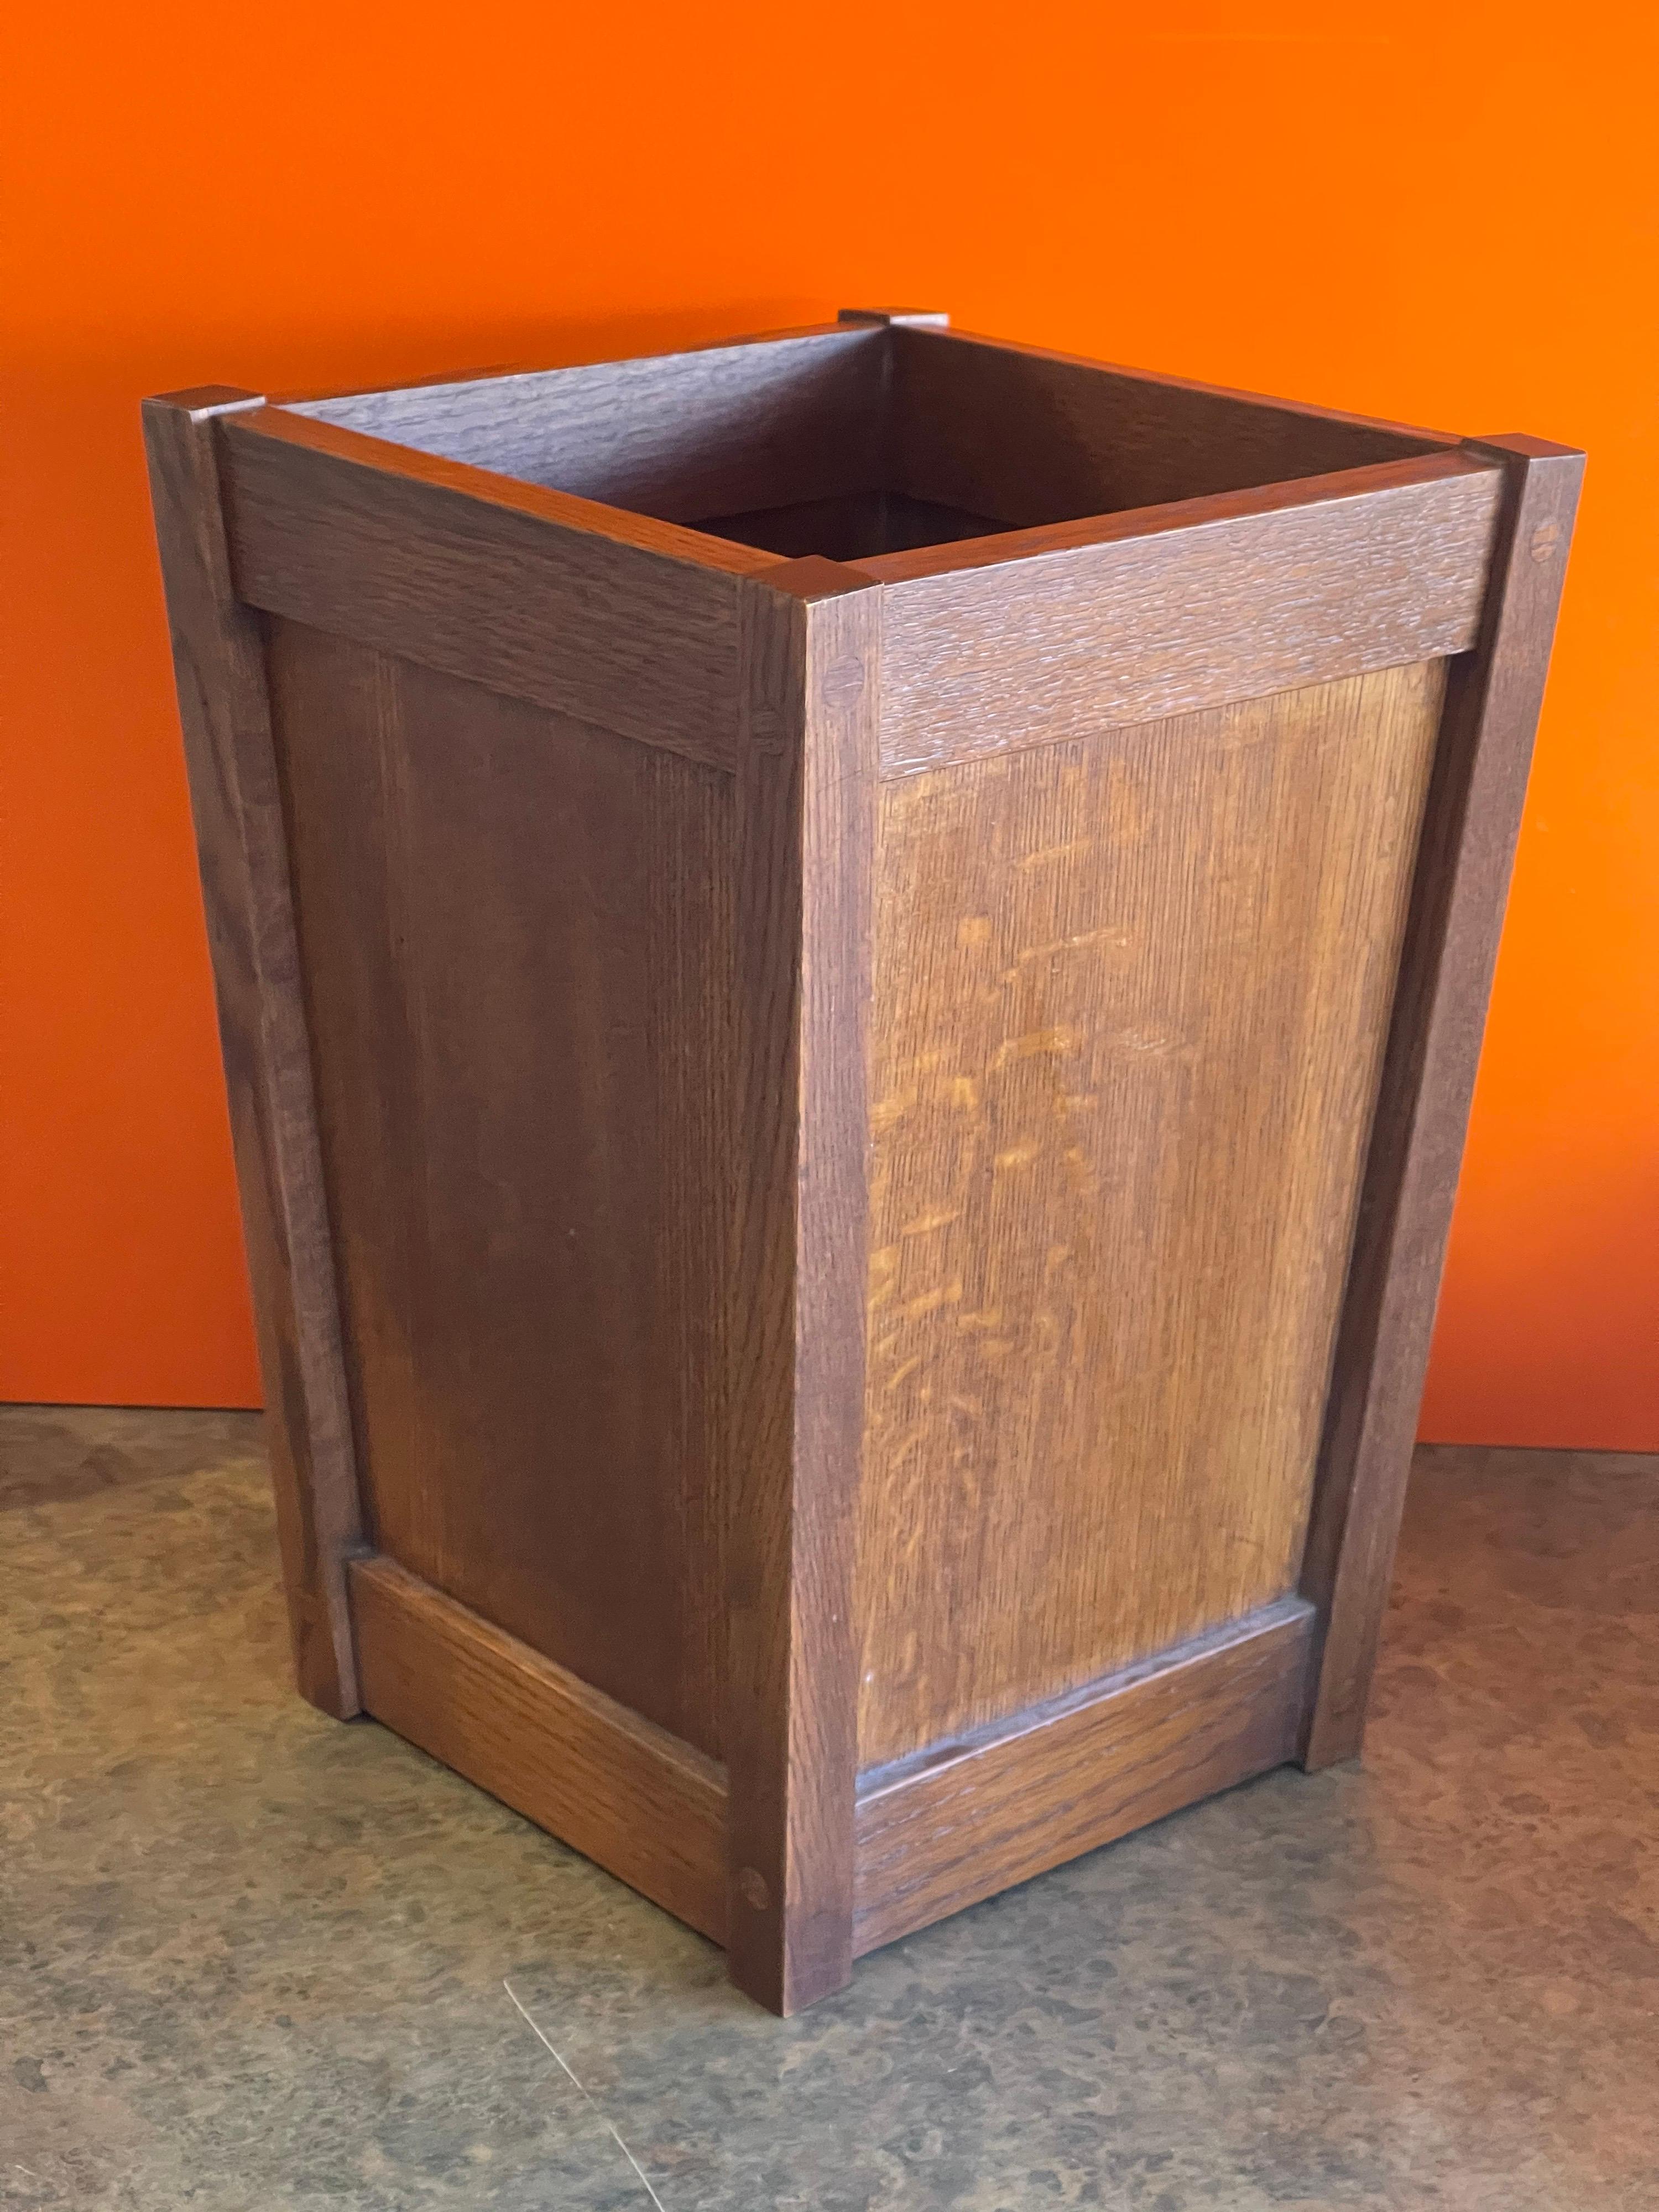 A very well constructed mission / craftsman style American quarter sawn oak waste basket, circa 1990s. The waste basket is in very good condition and measures 11